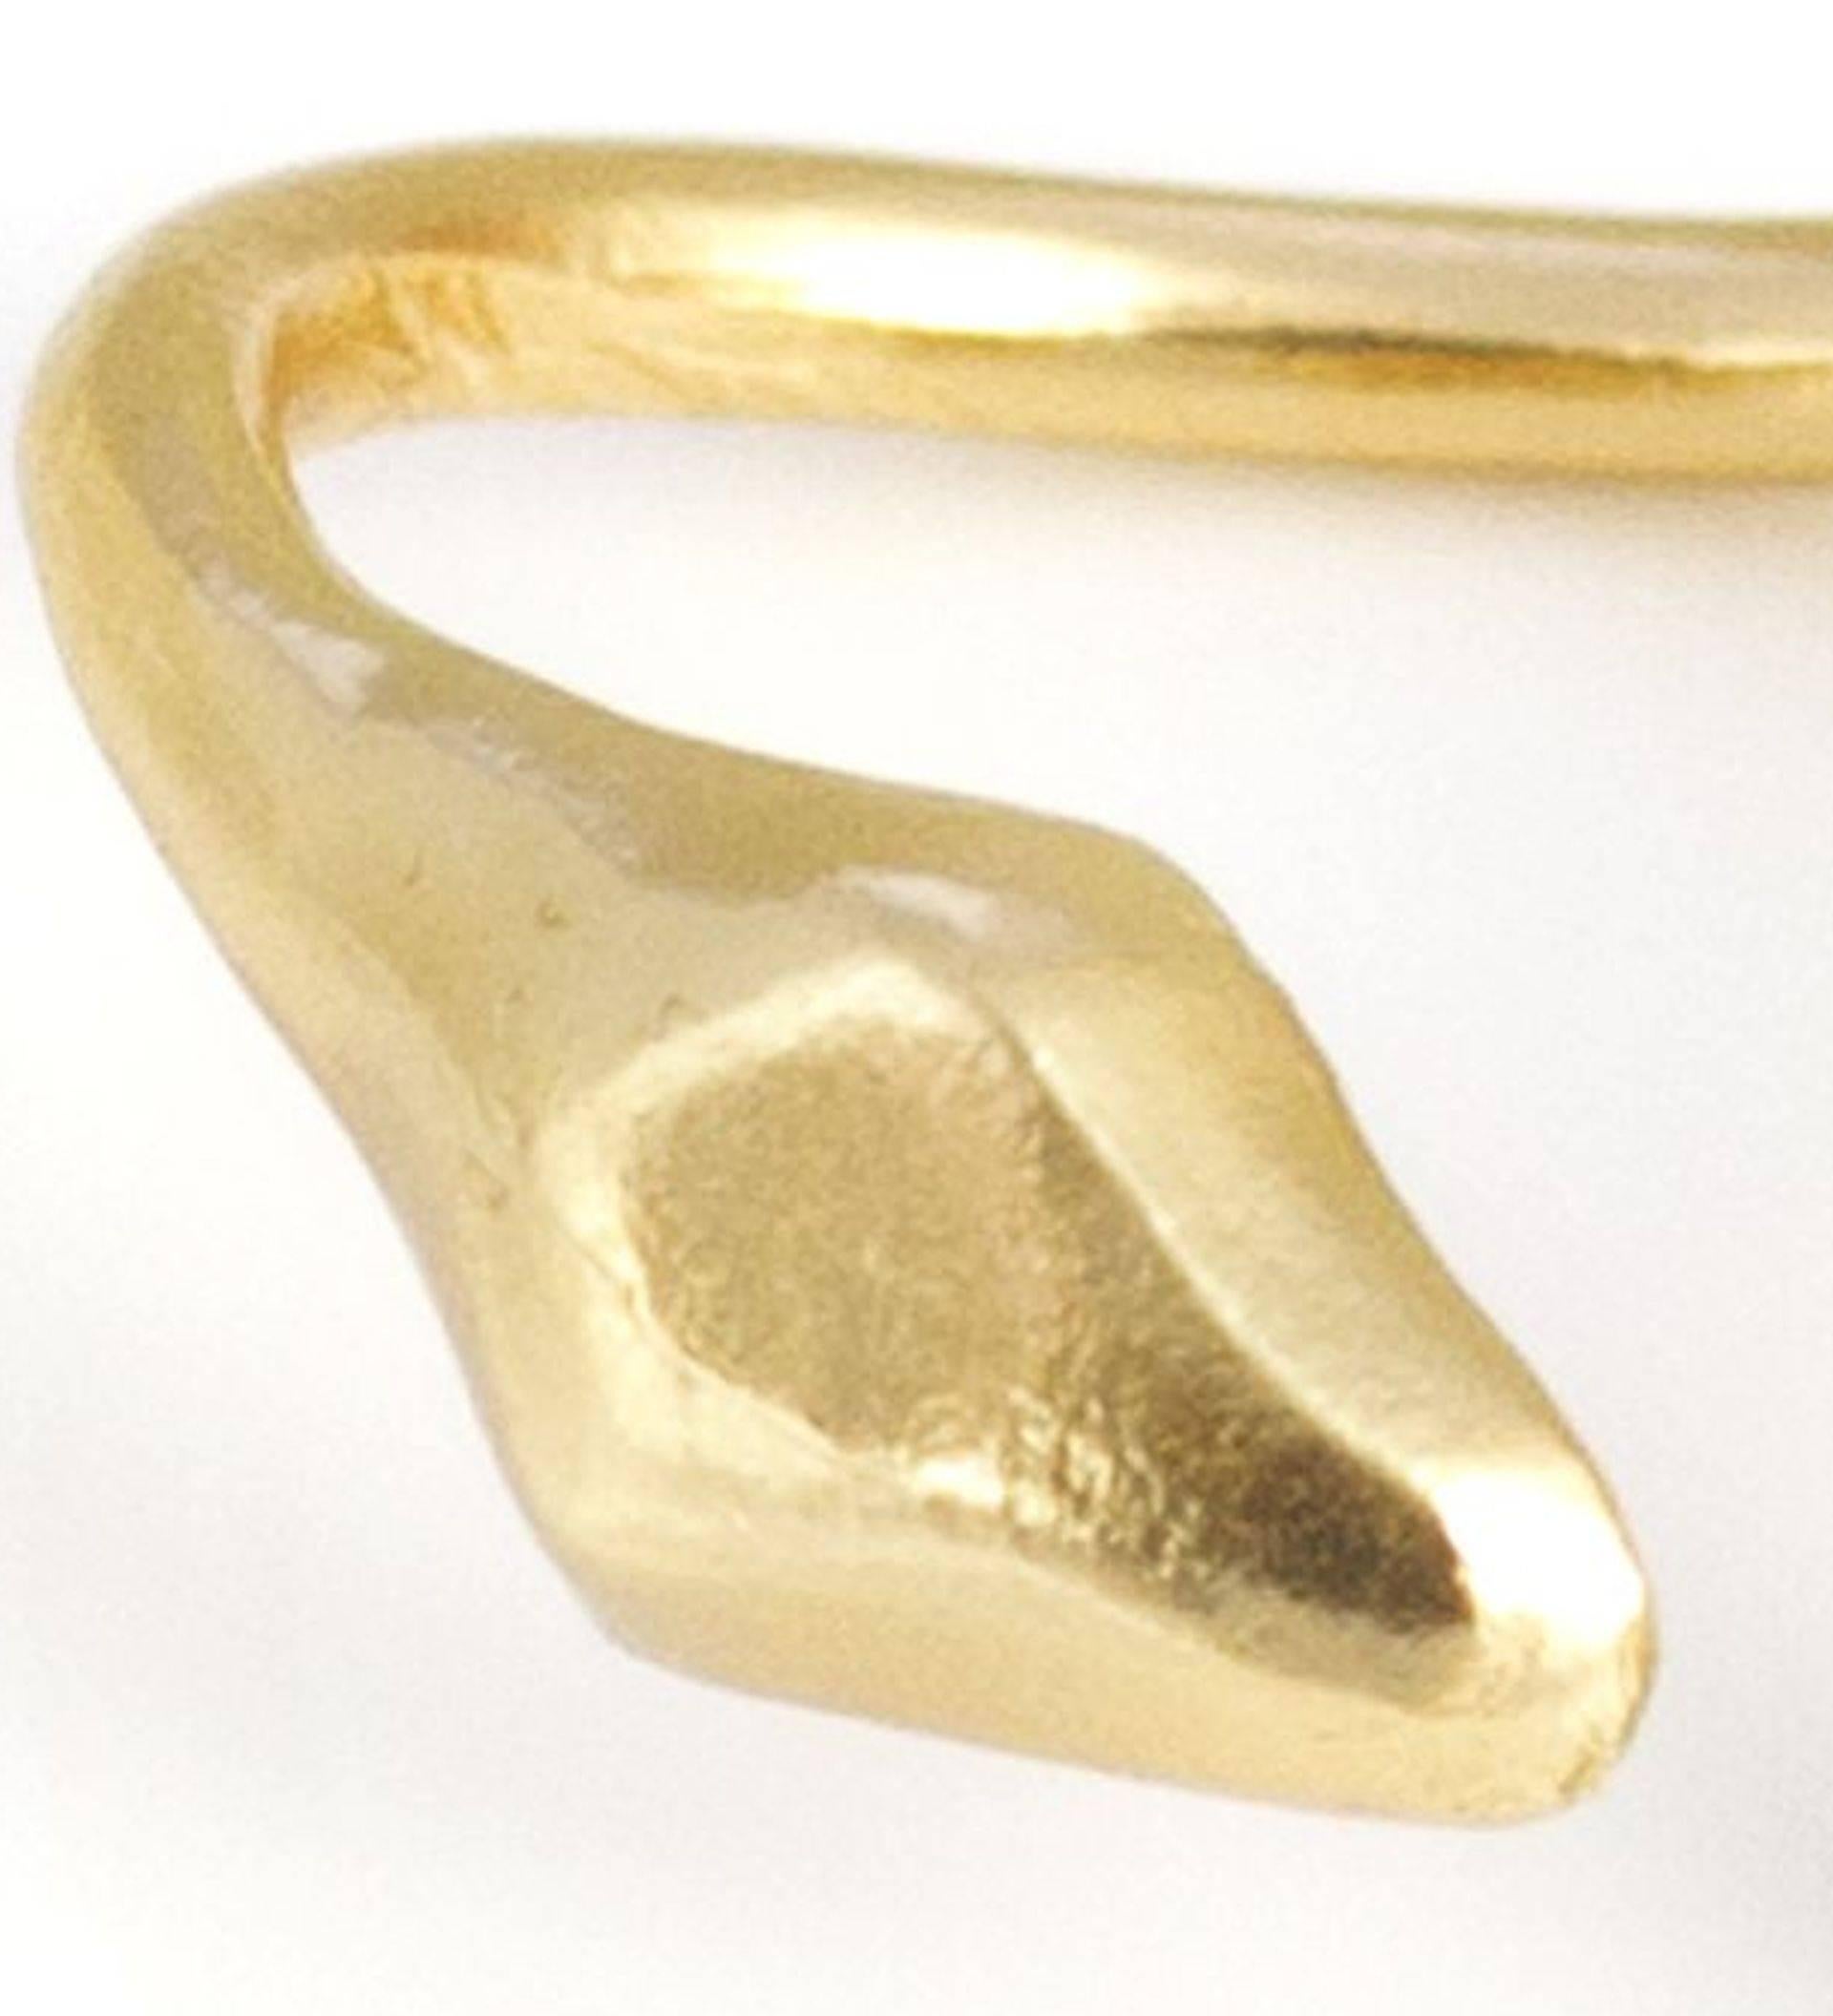 Giulia Barela' s gold-plated bronze Ribbon ring

A snake gets comfortable between a few fingers, hold on tight creating a bond of strength.

